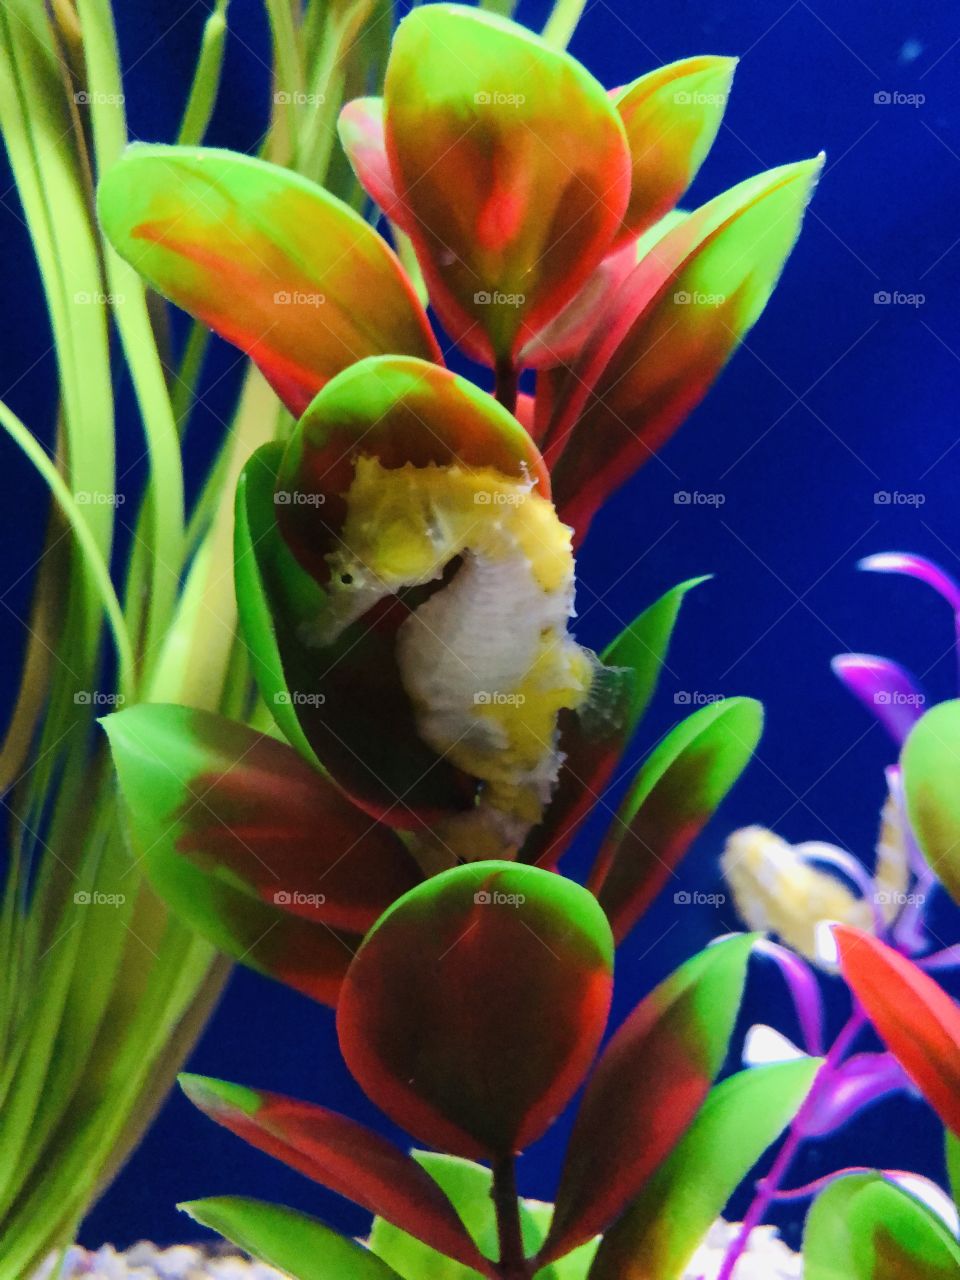 Bright yellow seahorse hides among the dramatic colours of the underwater plant life